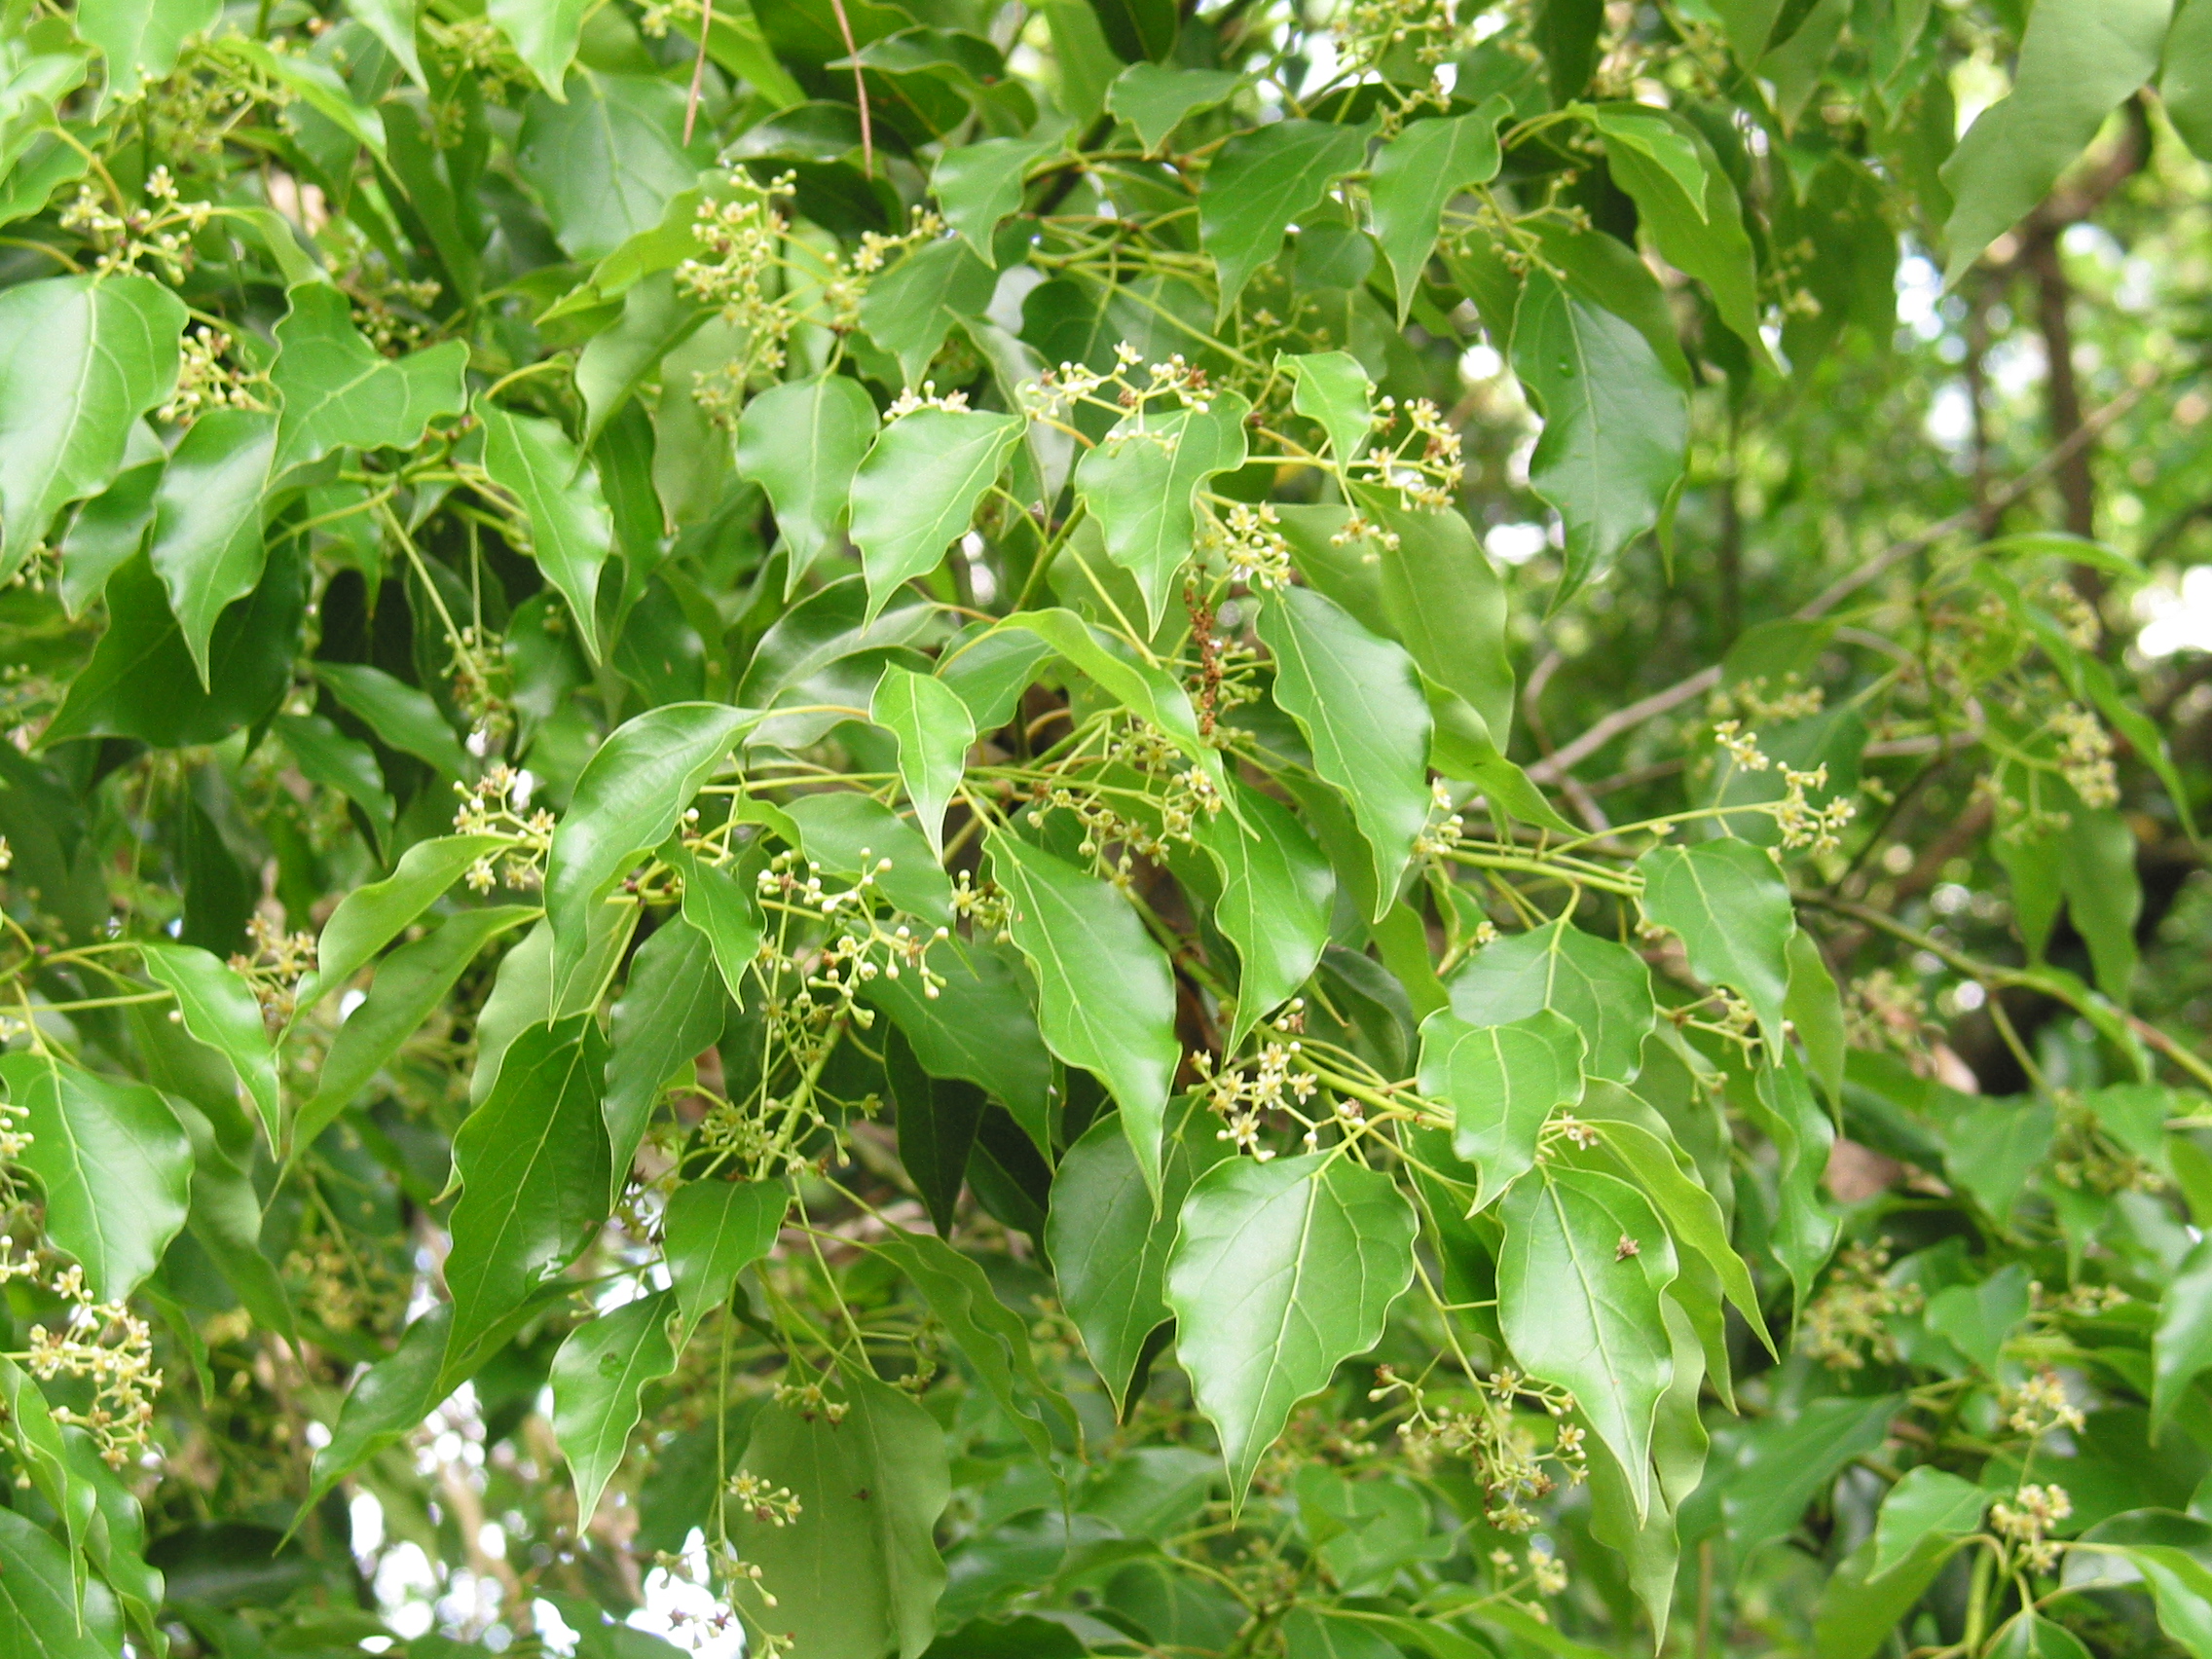 Glossy leaves and small pedunculate flowers.